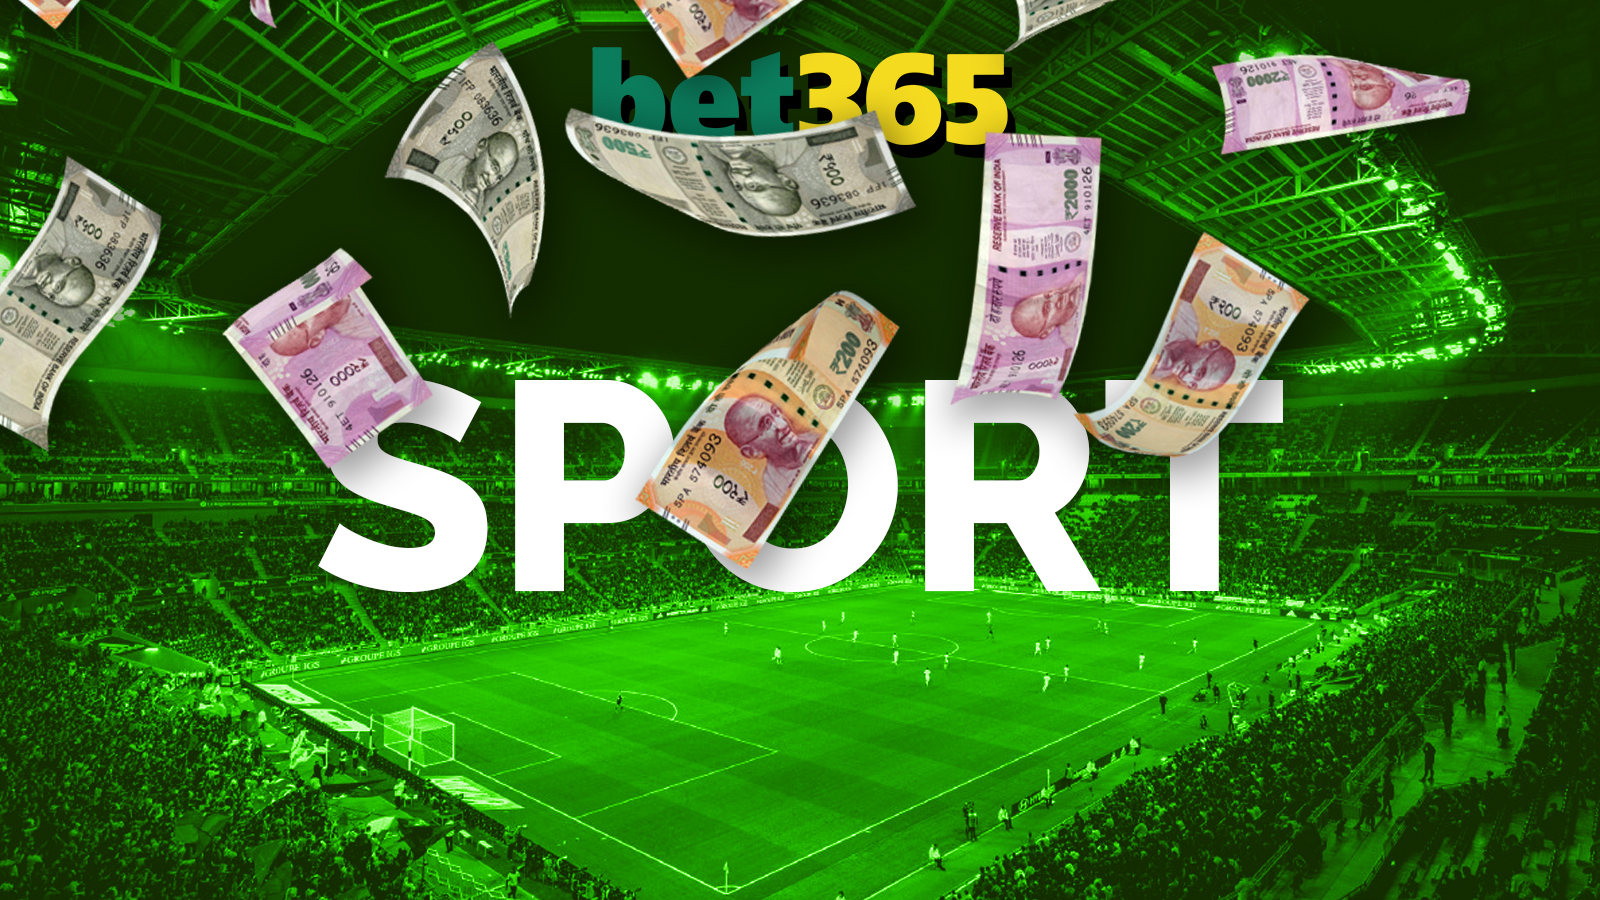 bet365 offer wide range of sports betting options